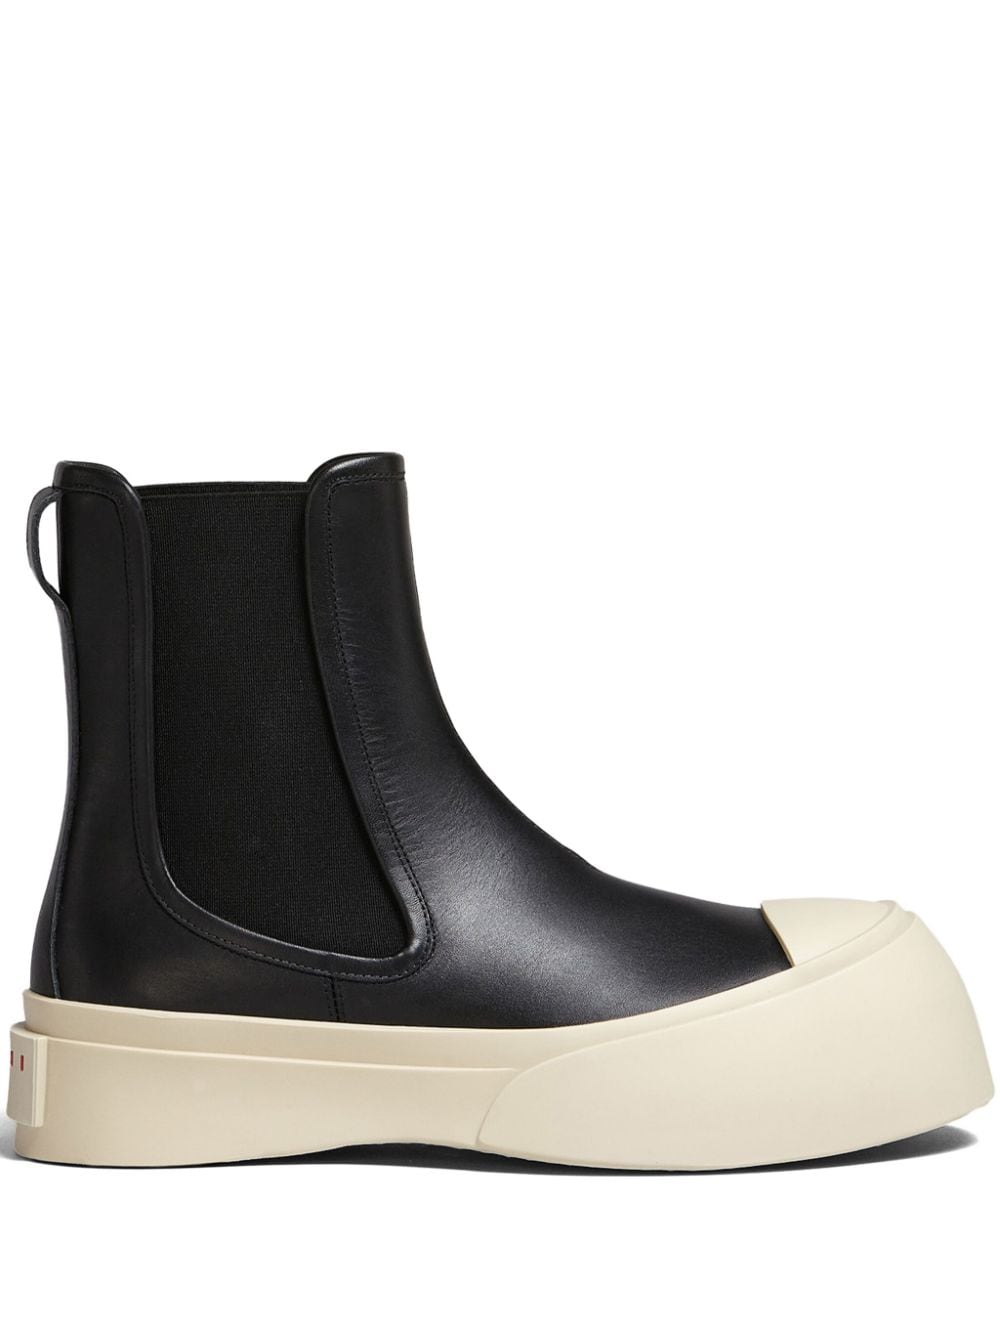 Pablo leather Chelsea boots